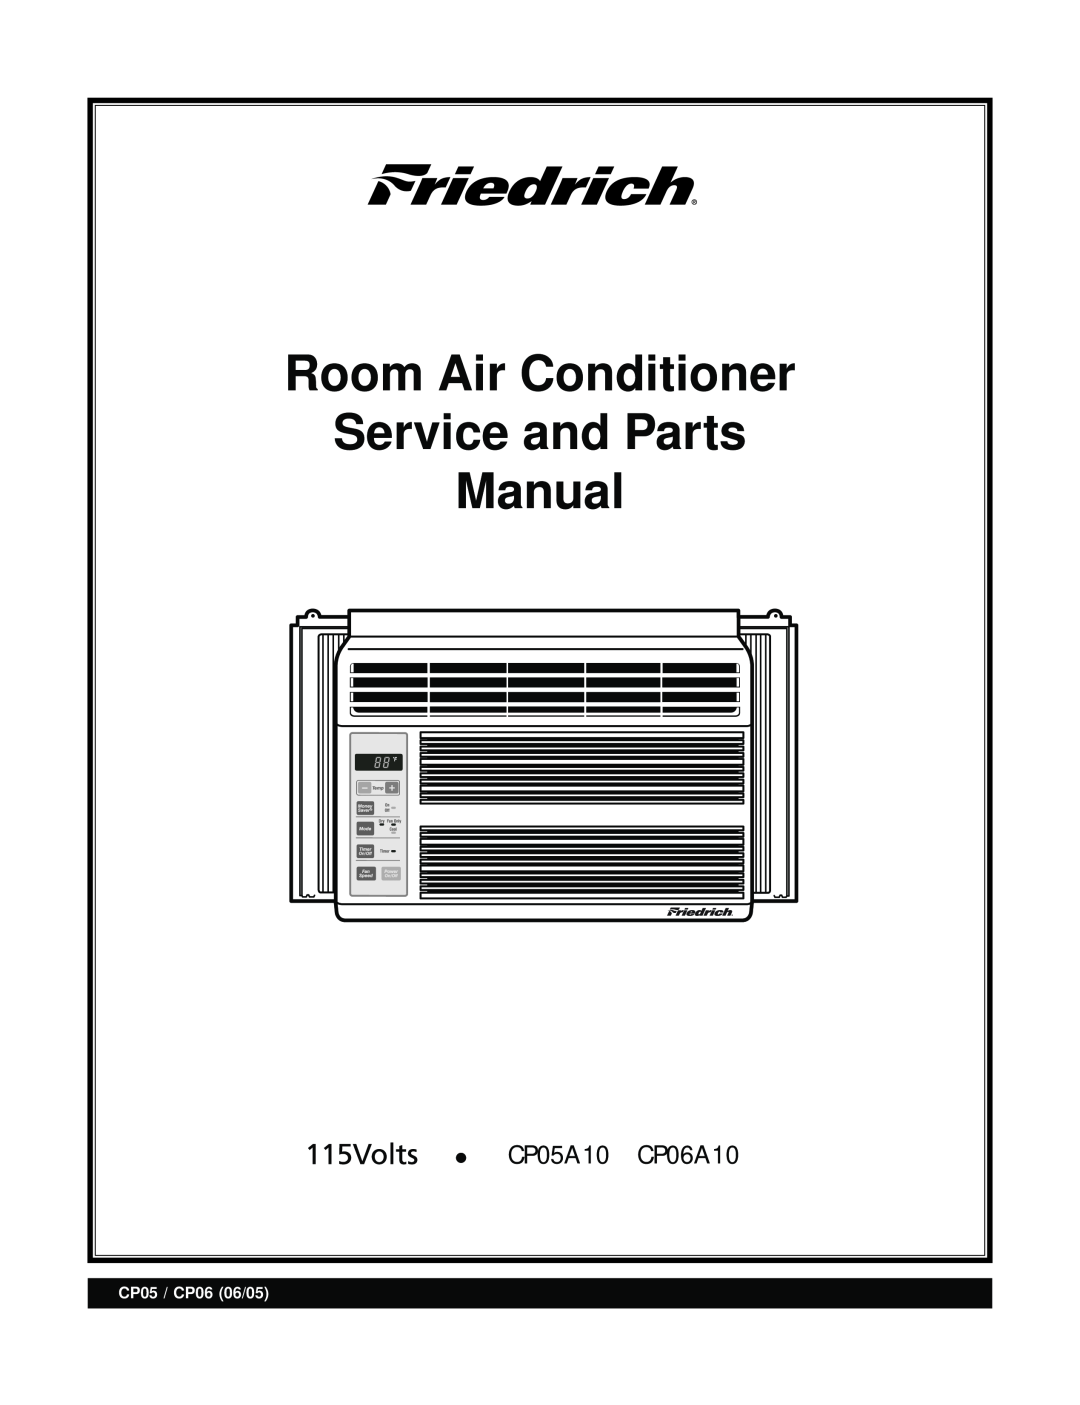 Friedrich manual Room Air Conditioner Service and Parts Manual, CP05A10 CP06A10, CP05 / CP06 06/05 